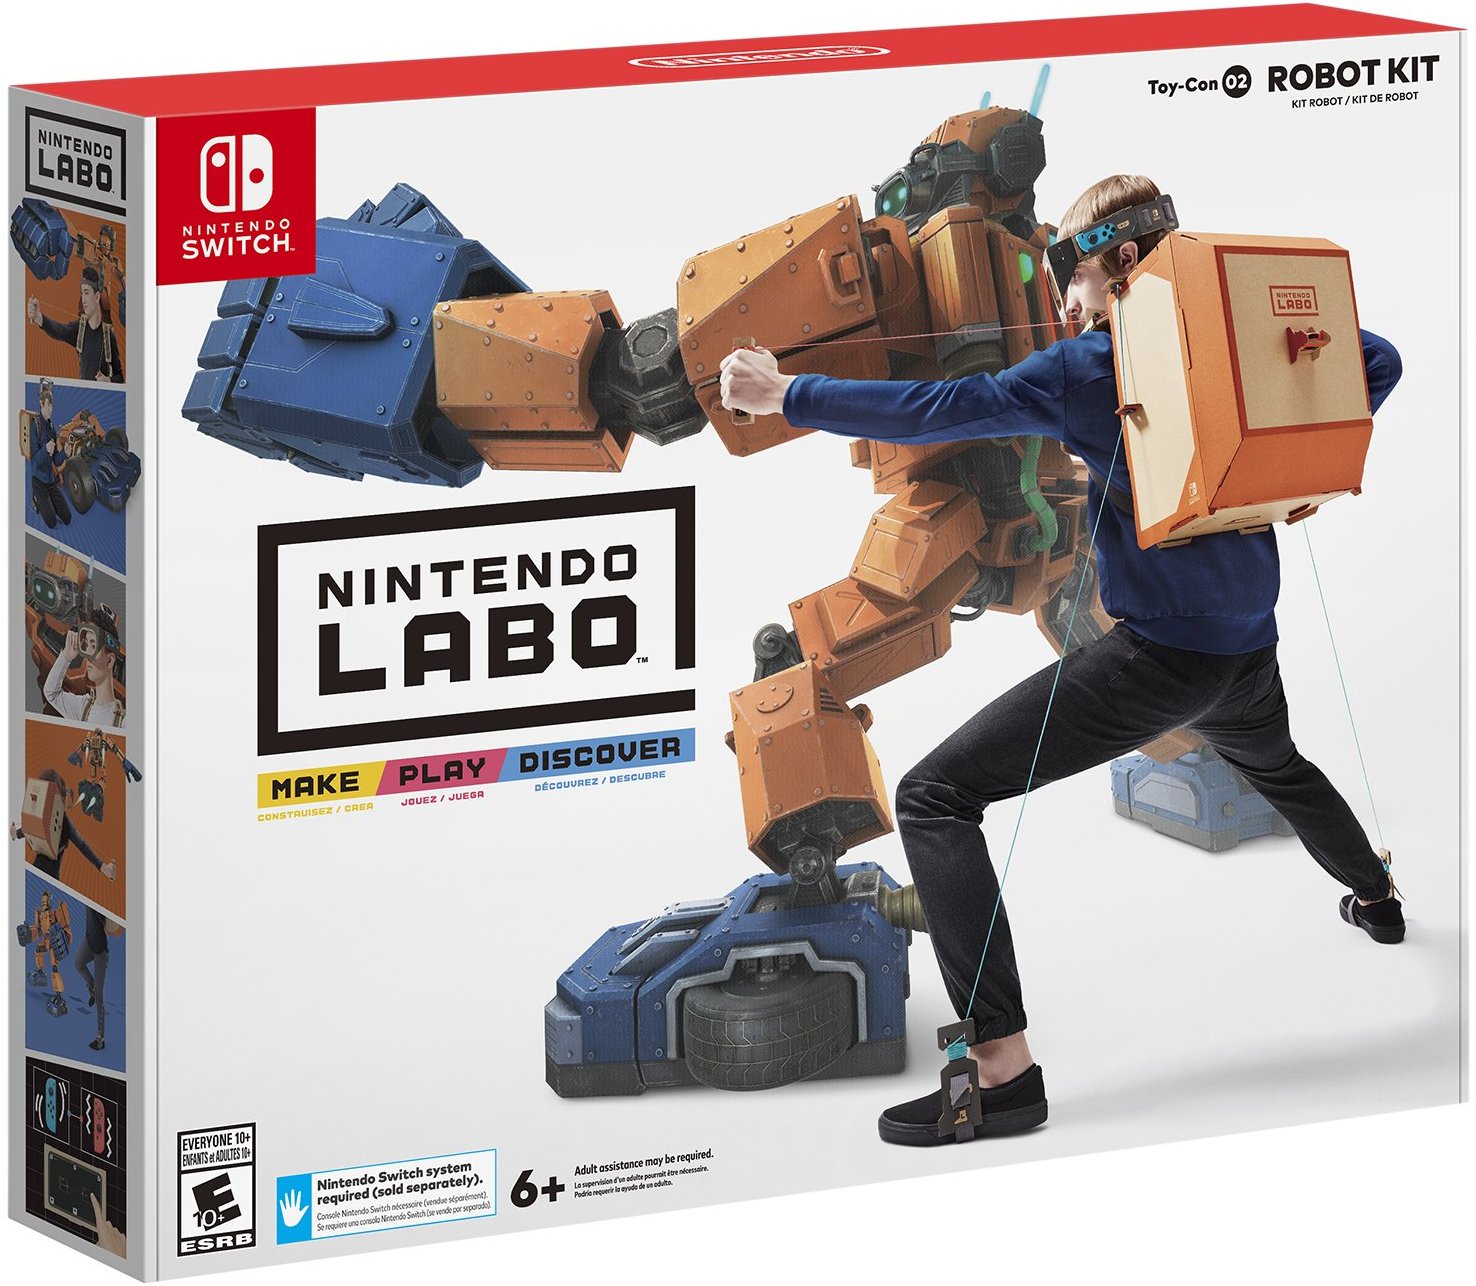 Nintendo Labo: Everything you need to know!